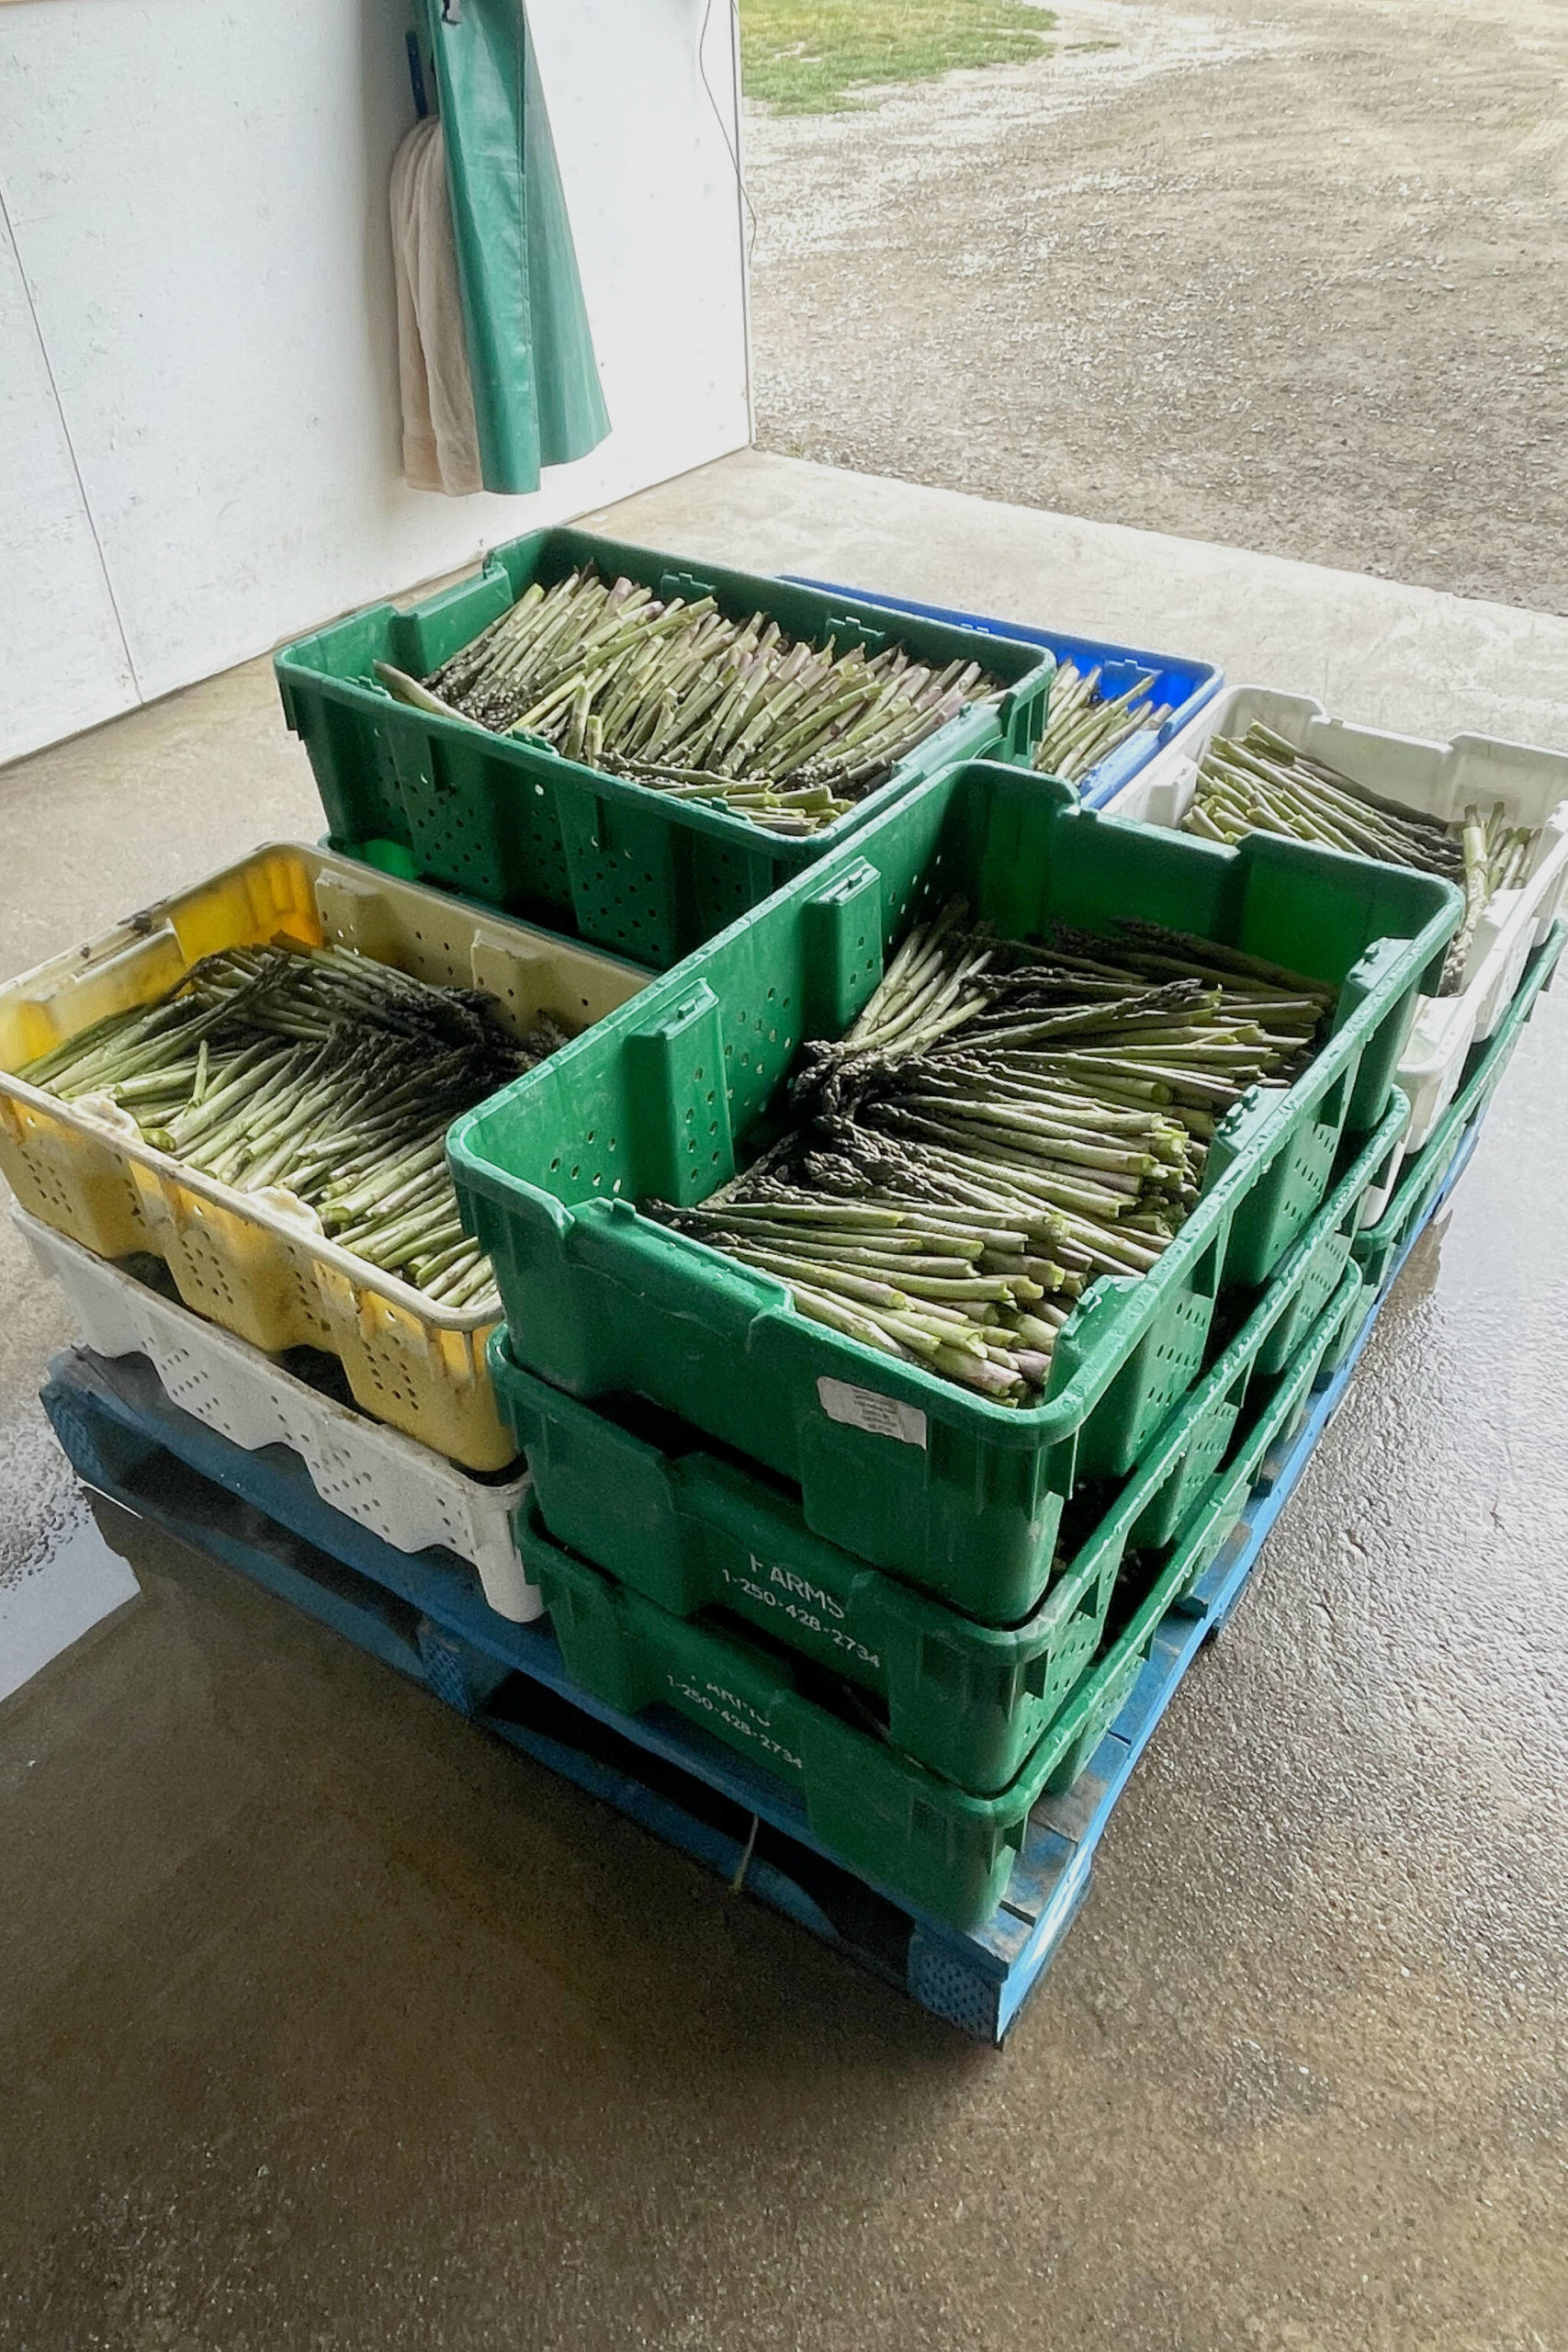 Once the asparagus is sorted and cleaned, it is ready to sell. (Photo by Kelsey Yates)